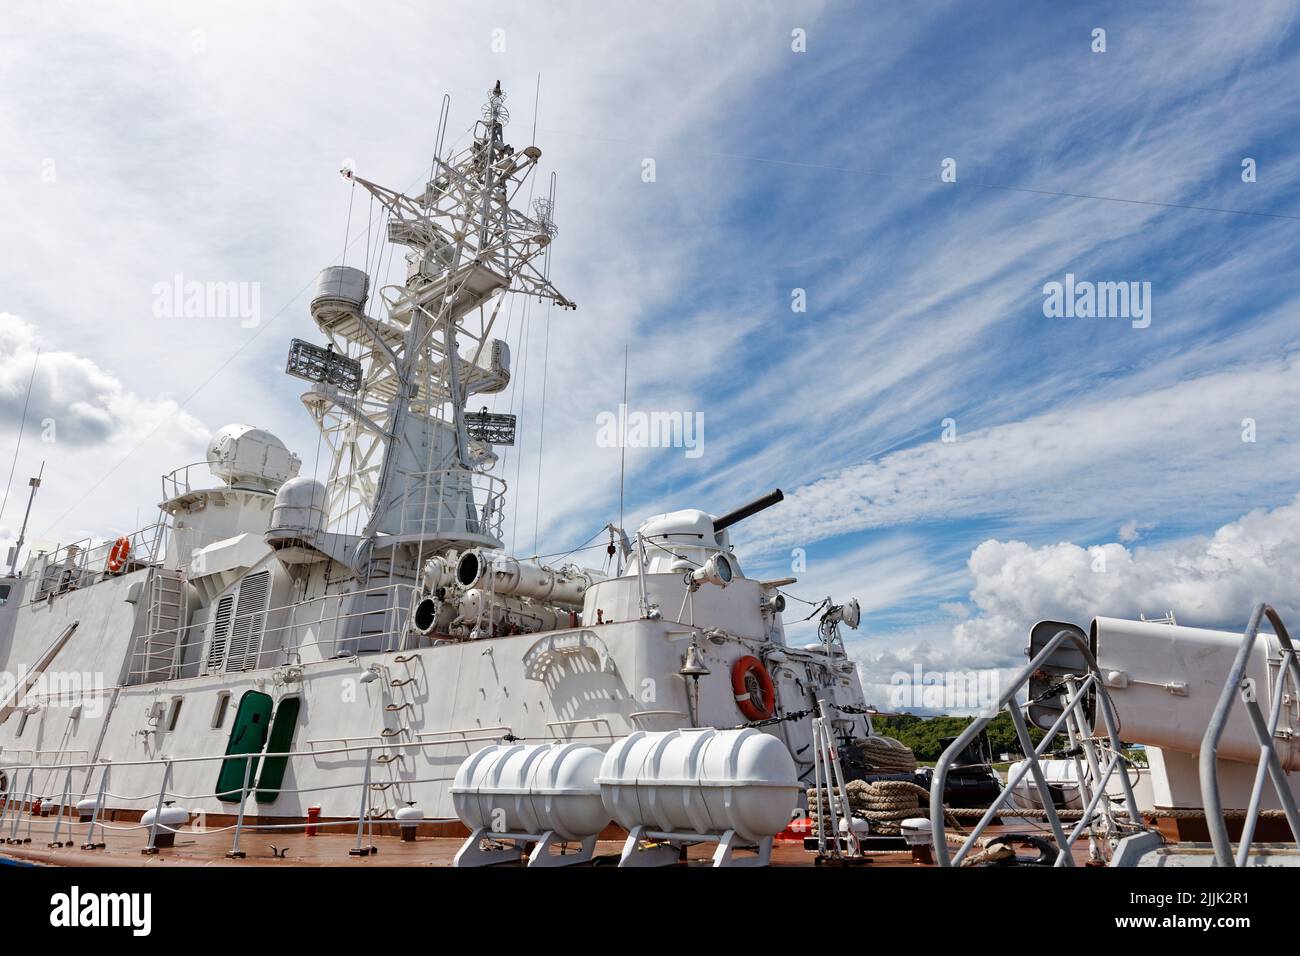 Closeup view of sea warship against cloudy blue sky Stock Photo